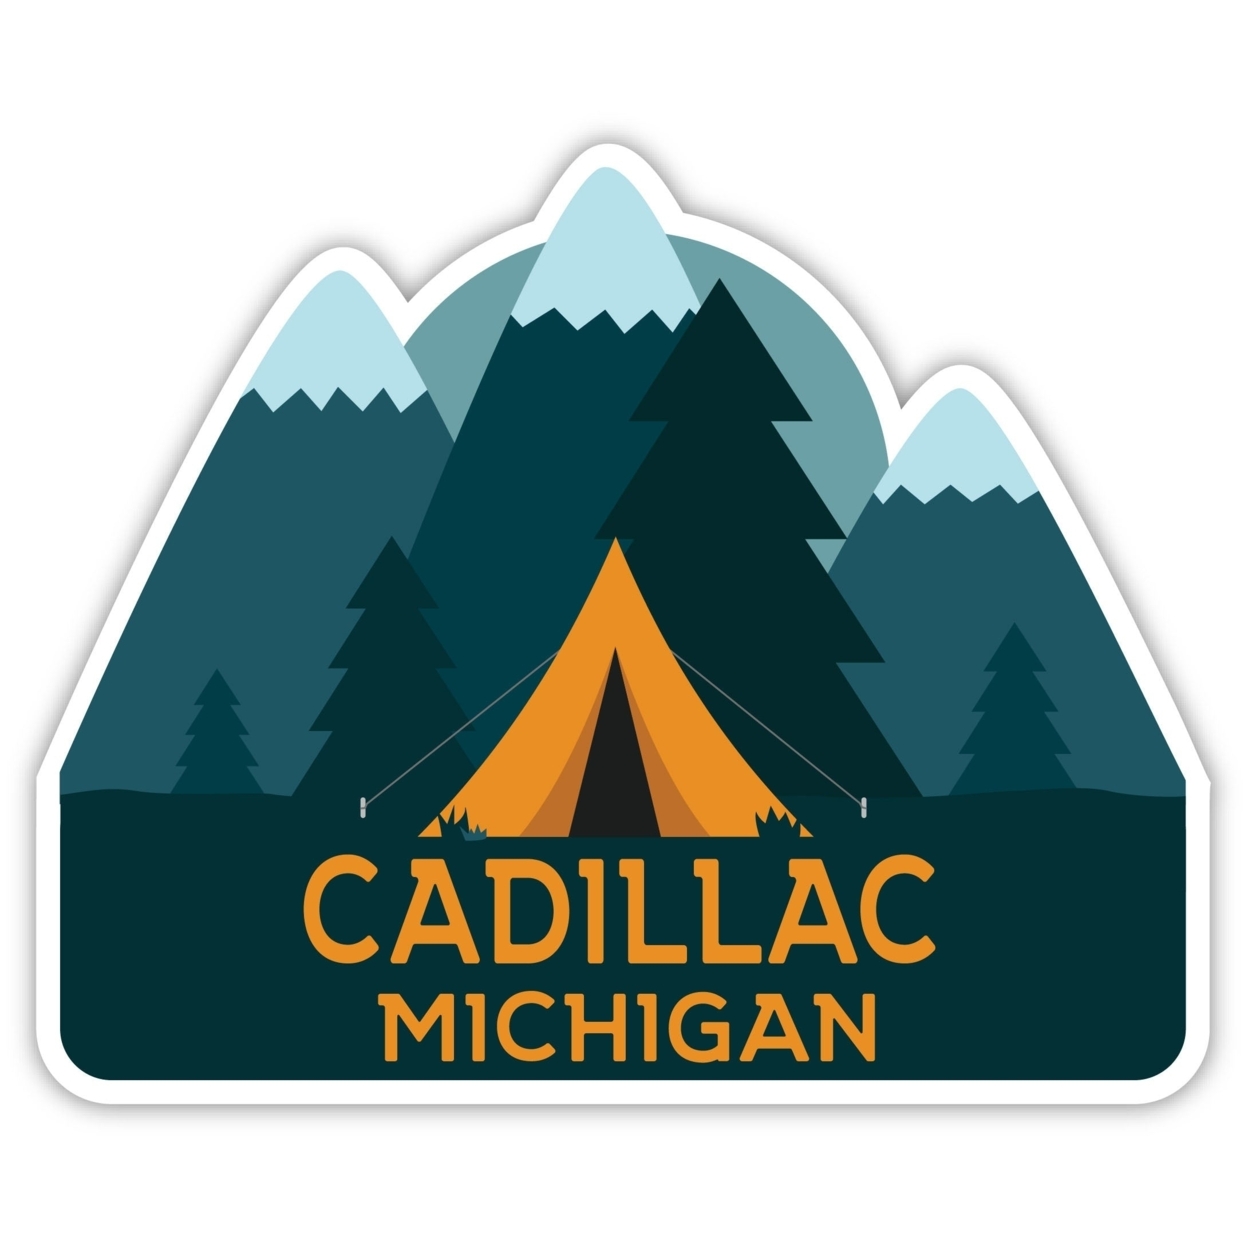 Cadillac Michigan Souvenir Decorative Stickers (Choose Theme And Size) - 4-Pack, 10-Inch, Tent